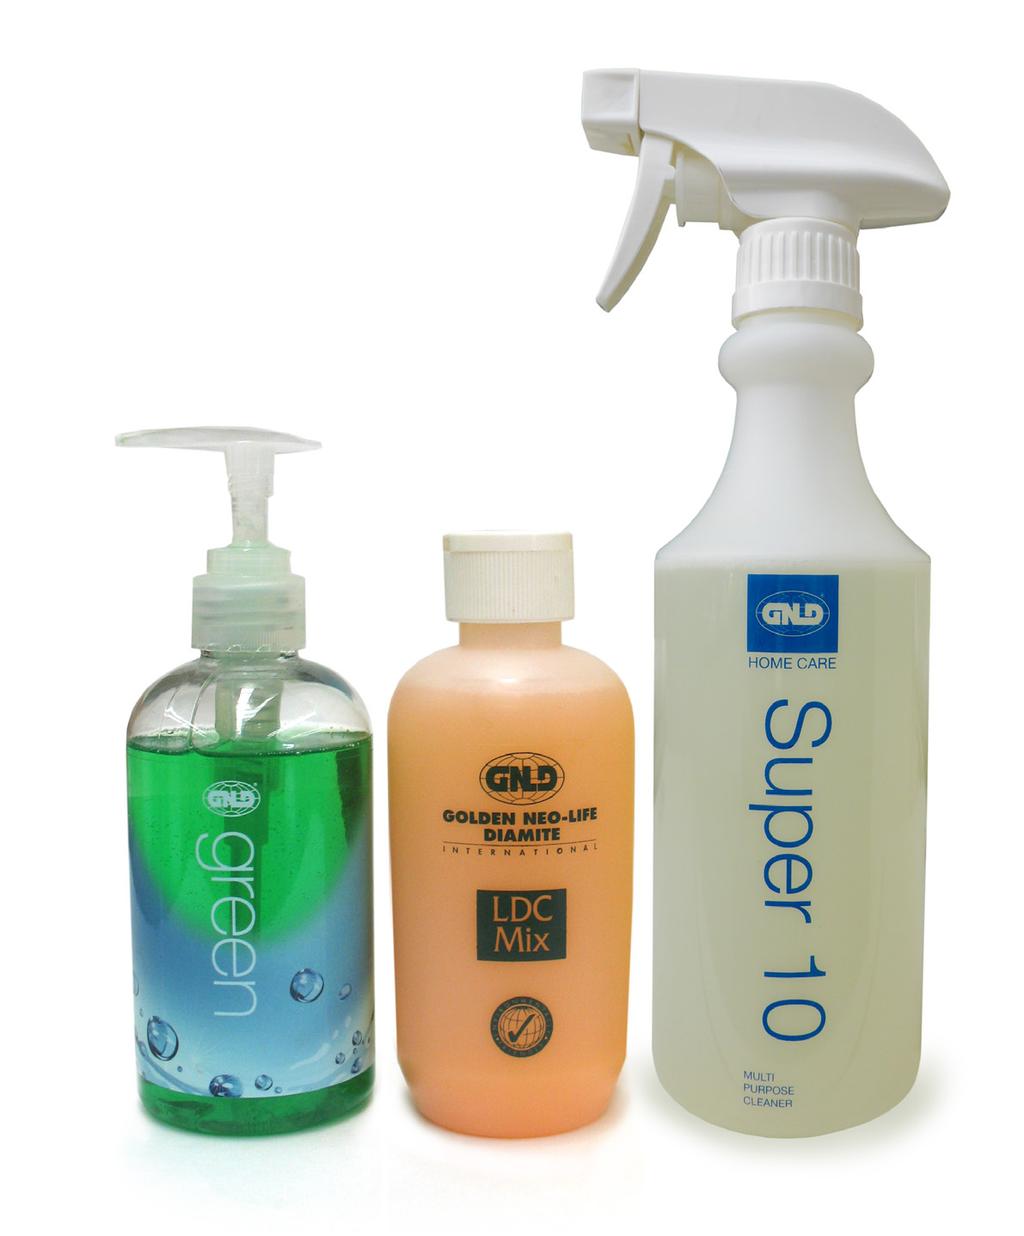 Demonstration Tips GNLD s liquid cleaners are superior products and with a little bit of practice, showing people exactly how effective they are will be a breeze!